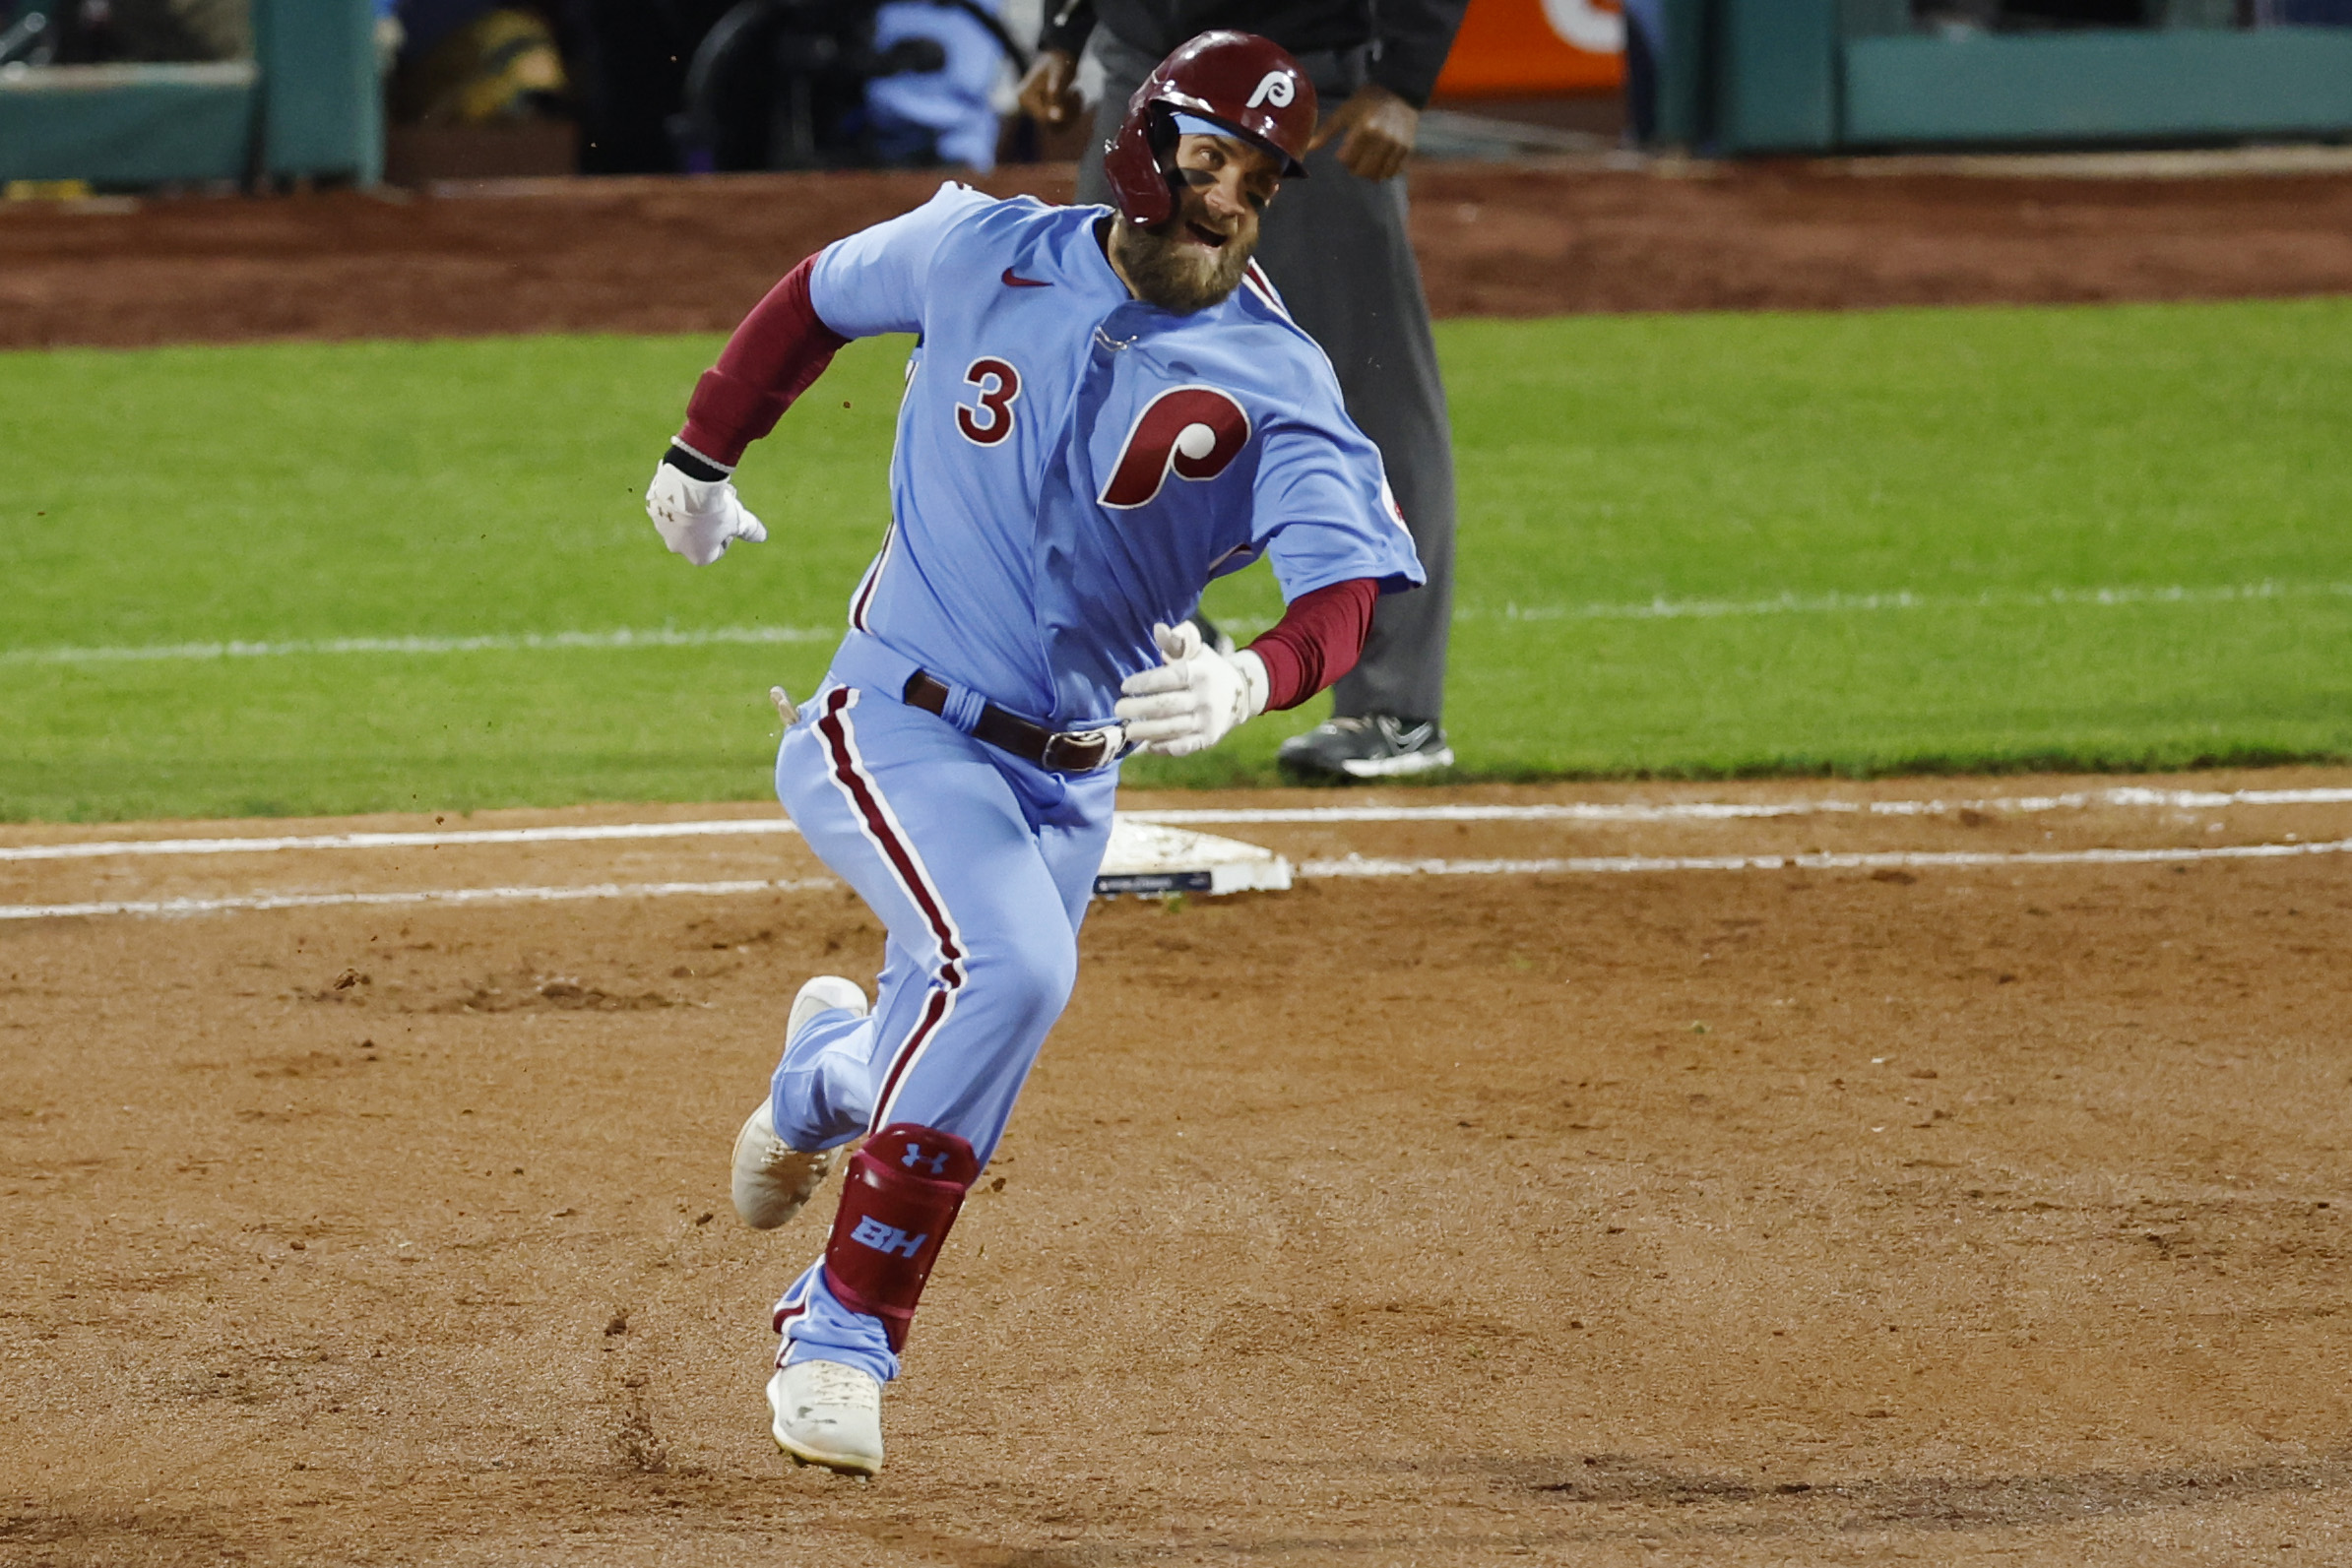 Phillies to wear powder blue uniforms for NLDS Game 4